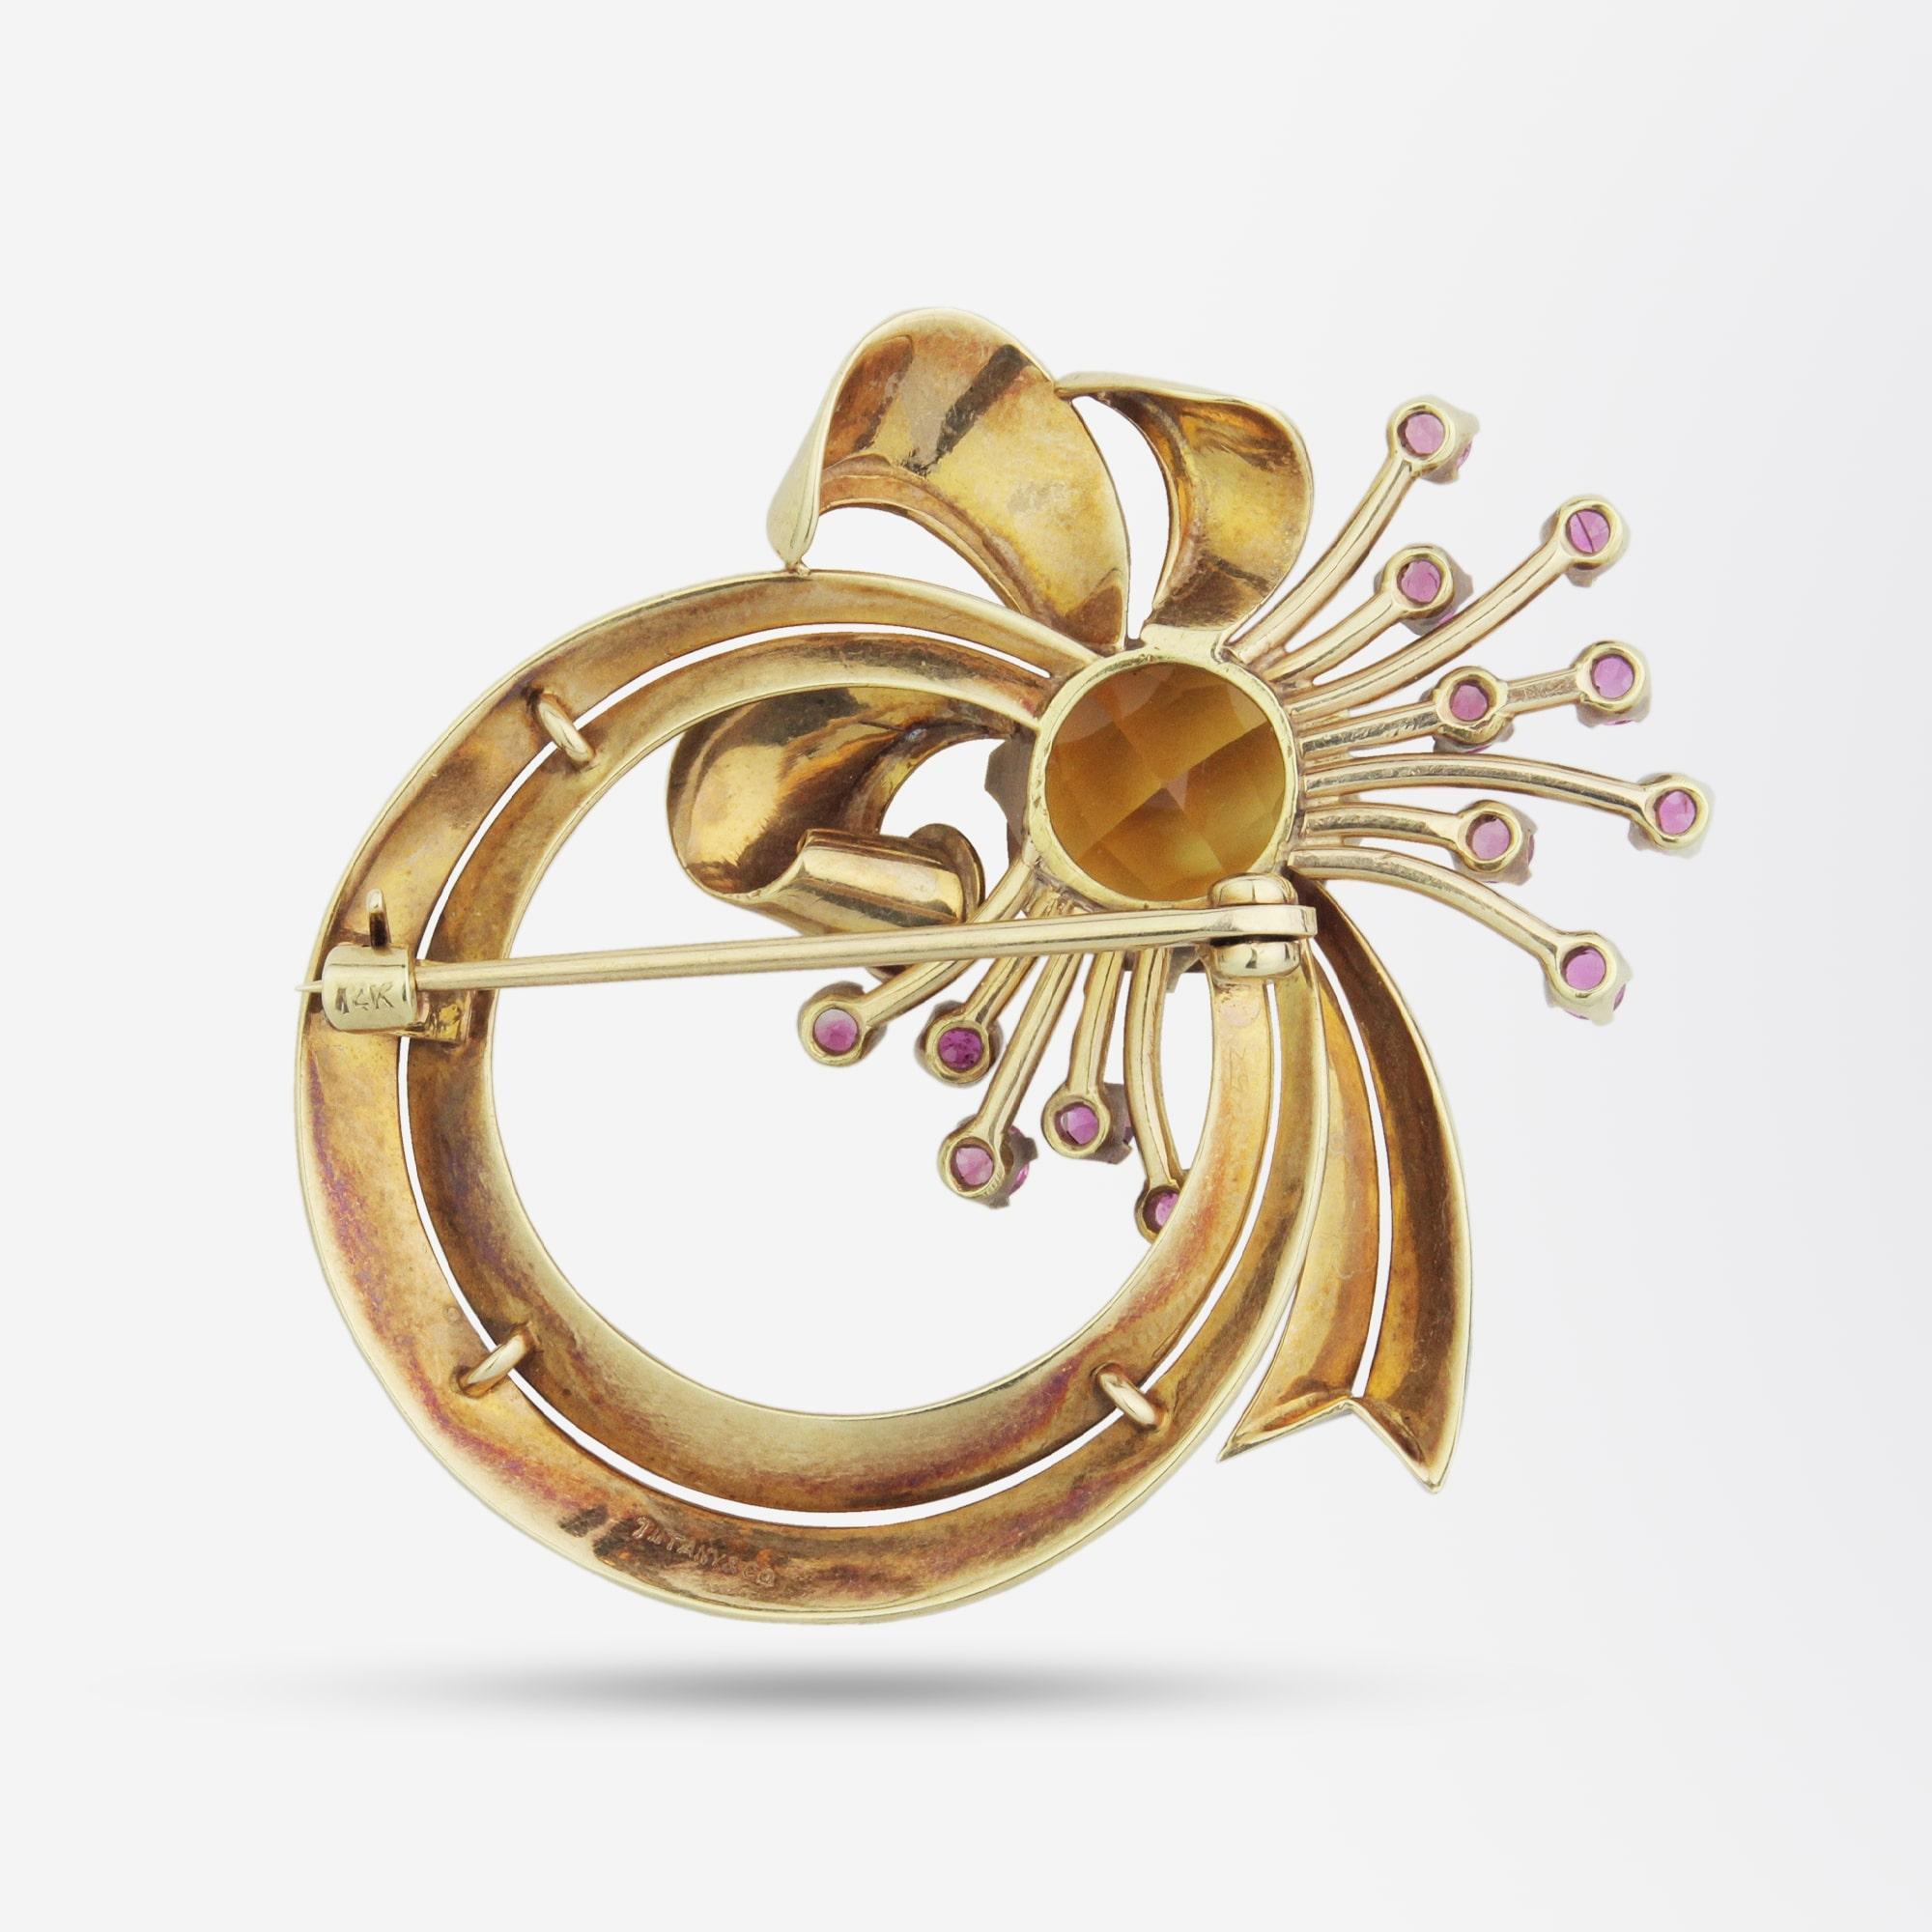 A mid-century, retro period, 14 karat yellow gold brooch by Tiffany & Company. The cocktail pin features a cushion cut citrine and 13 round mixed cut pink sapphires which combined with the sculpted gold 'ribbon' create a 'spray' of colour, often